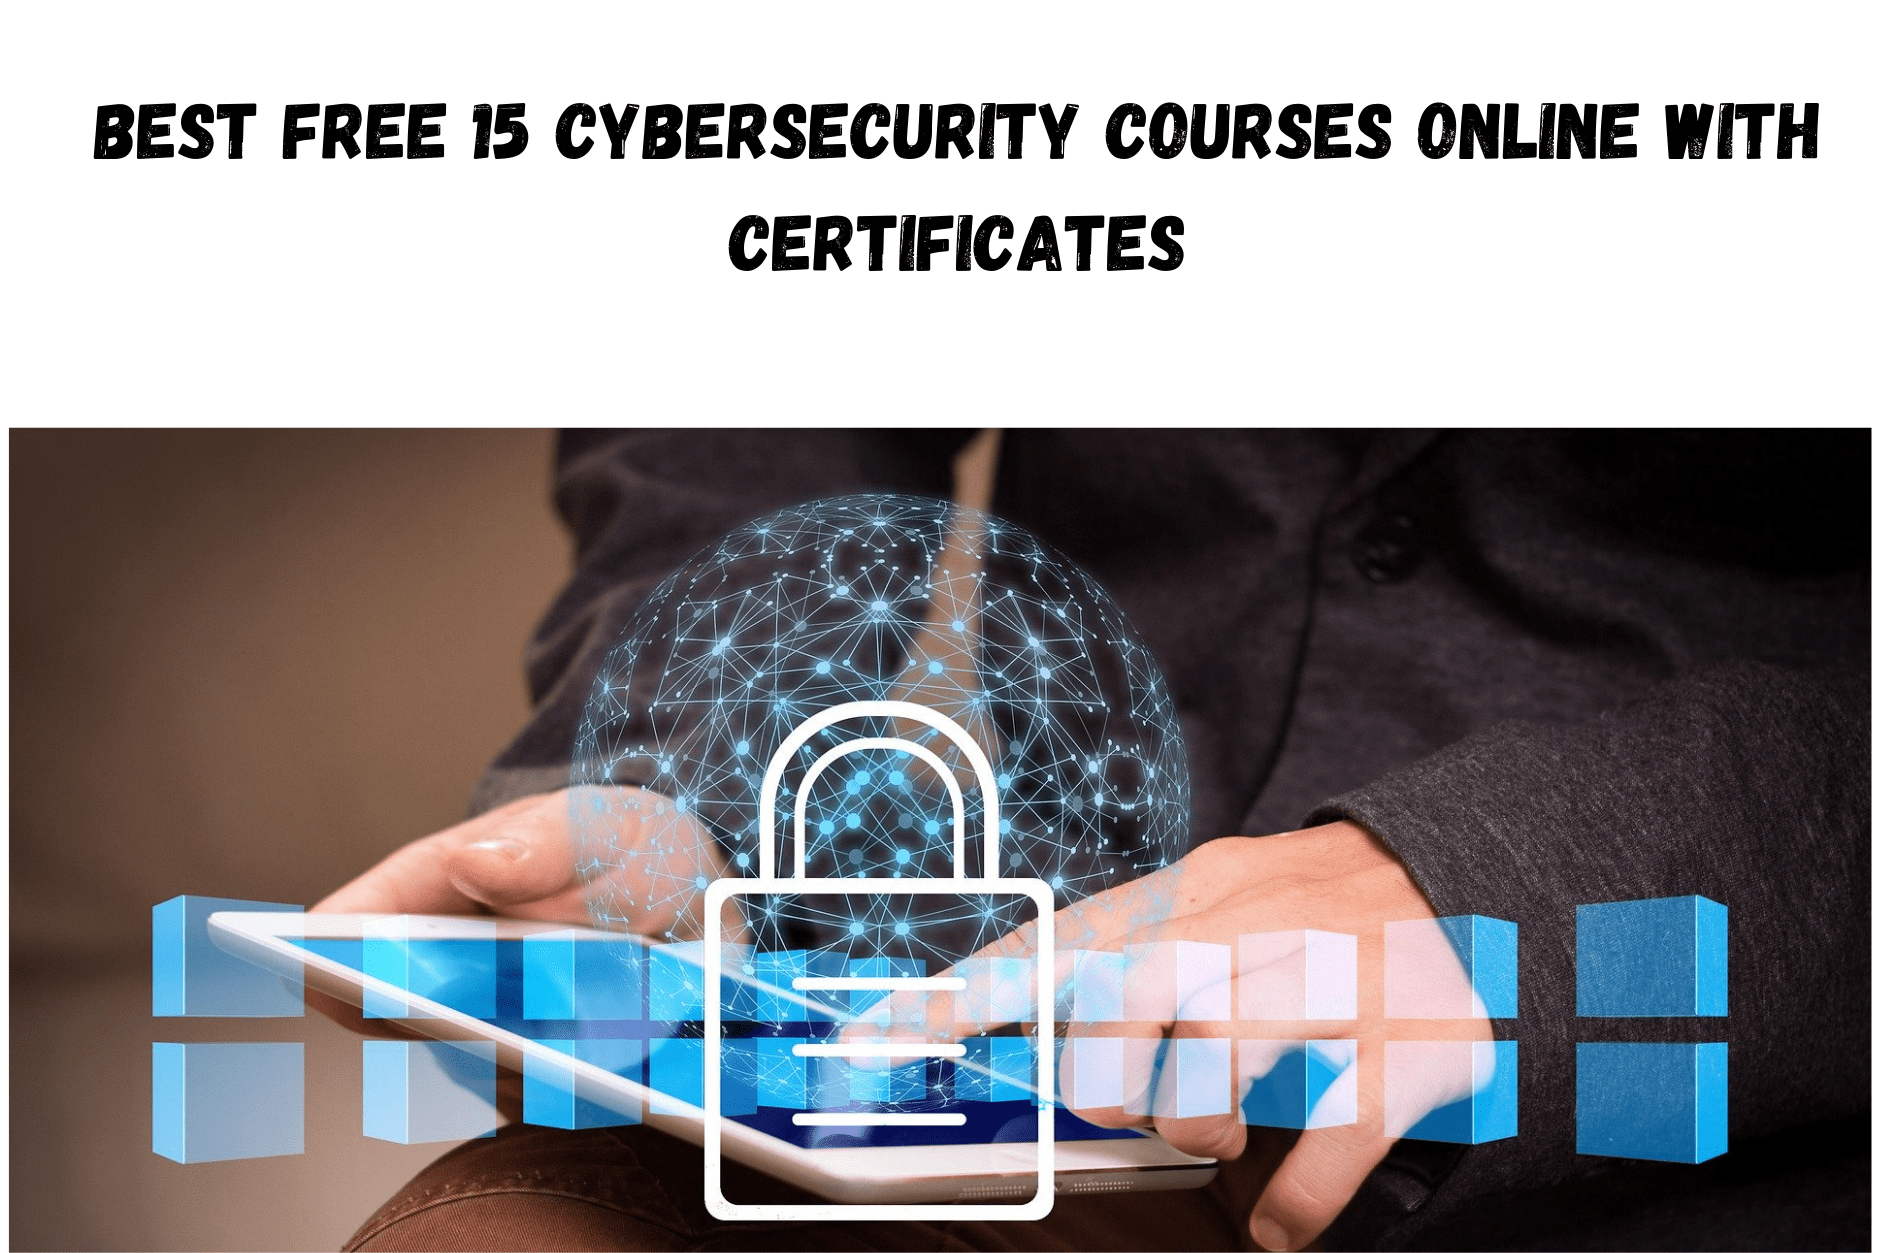 Best Free 15 Cybersecurity courses online with certificates